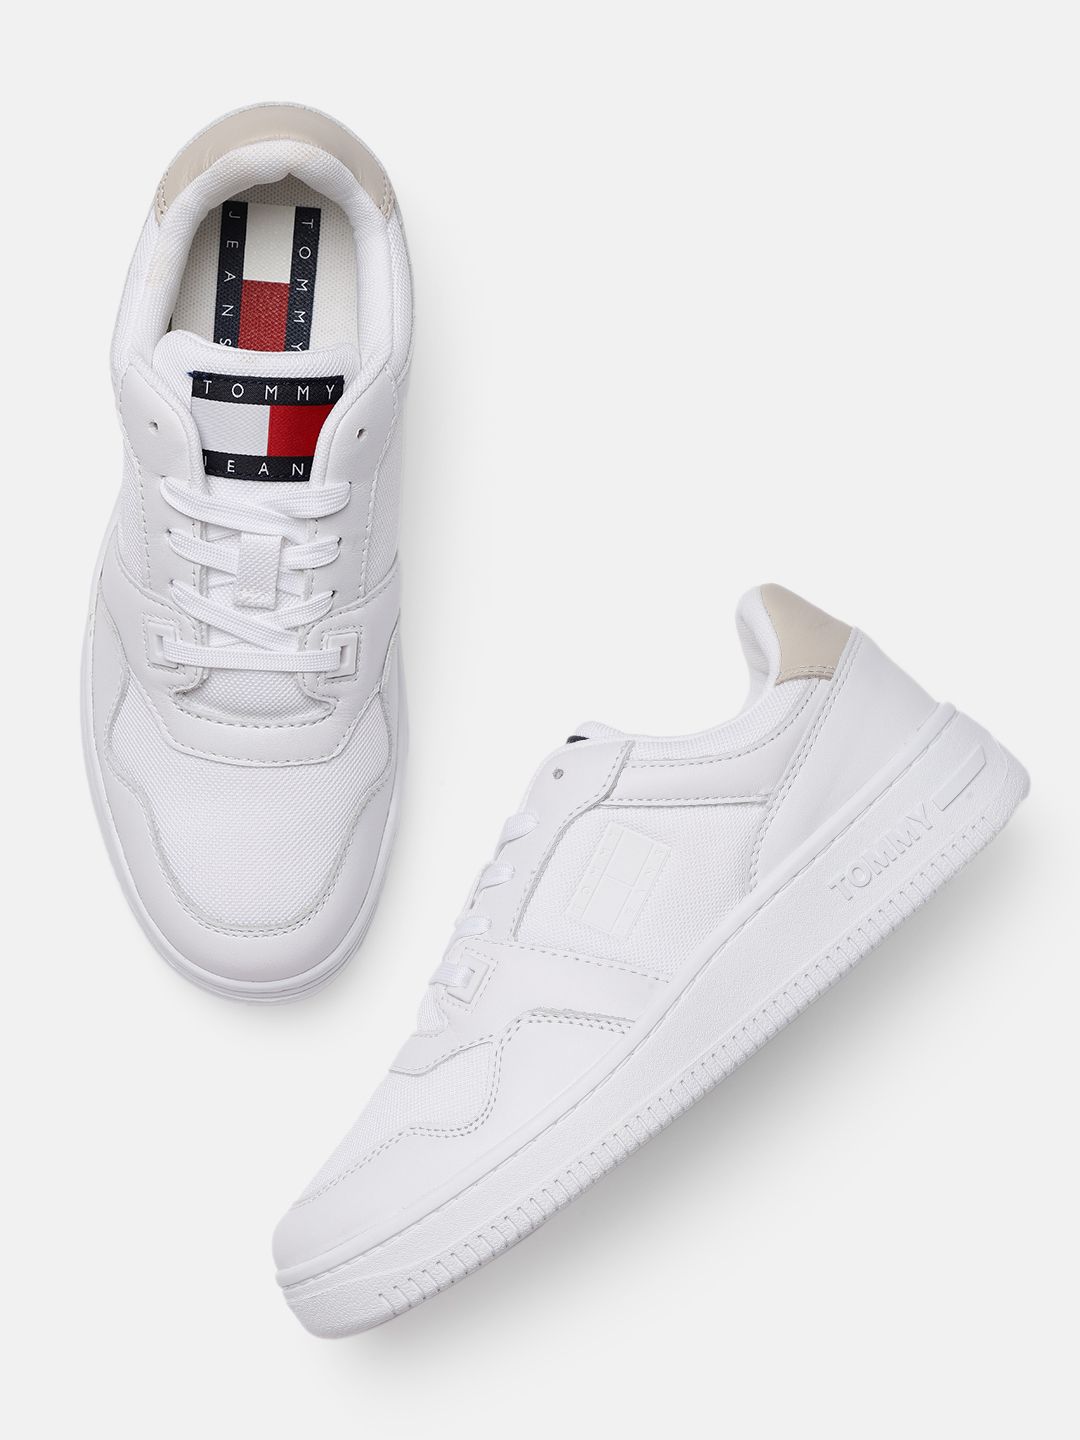 Tommy Hilfiger Jeans Women White Solid Mix Basket Regular Sneakers Price in India